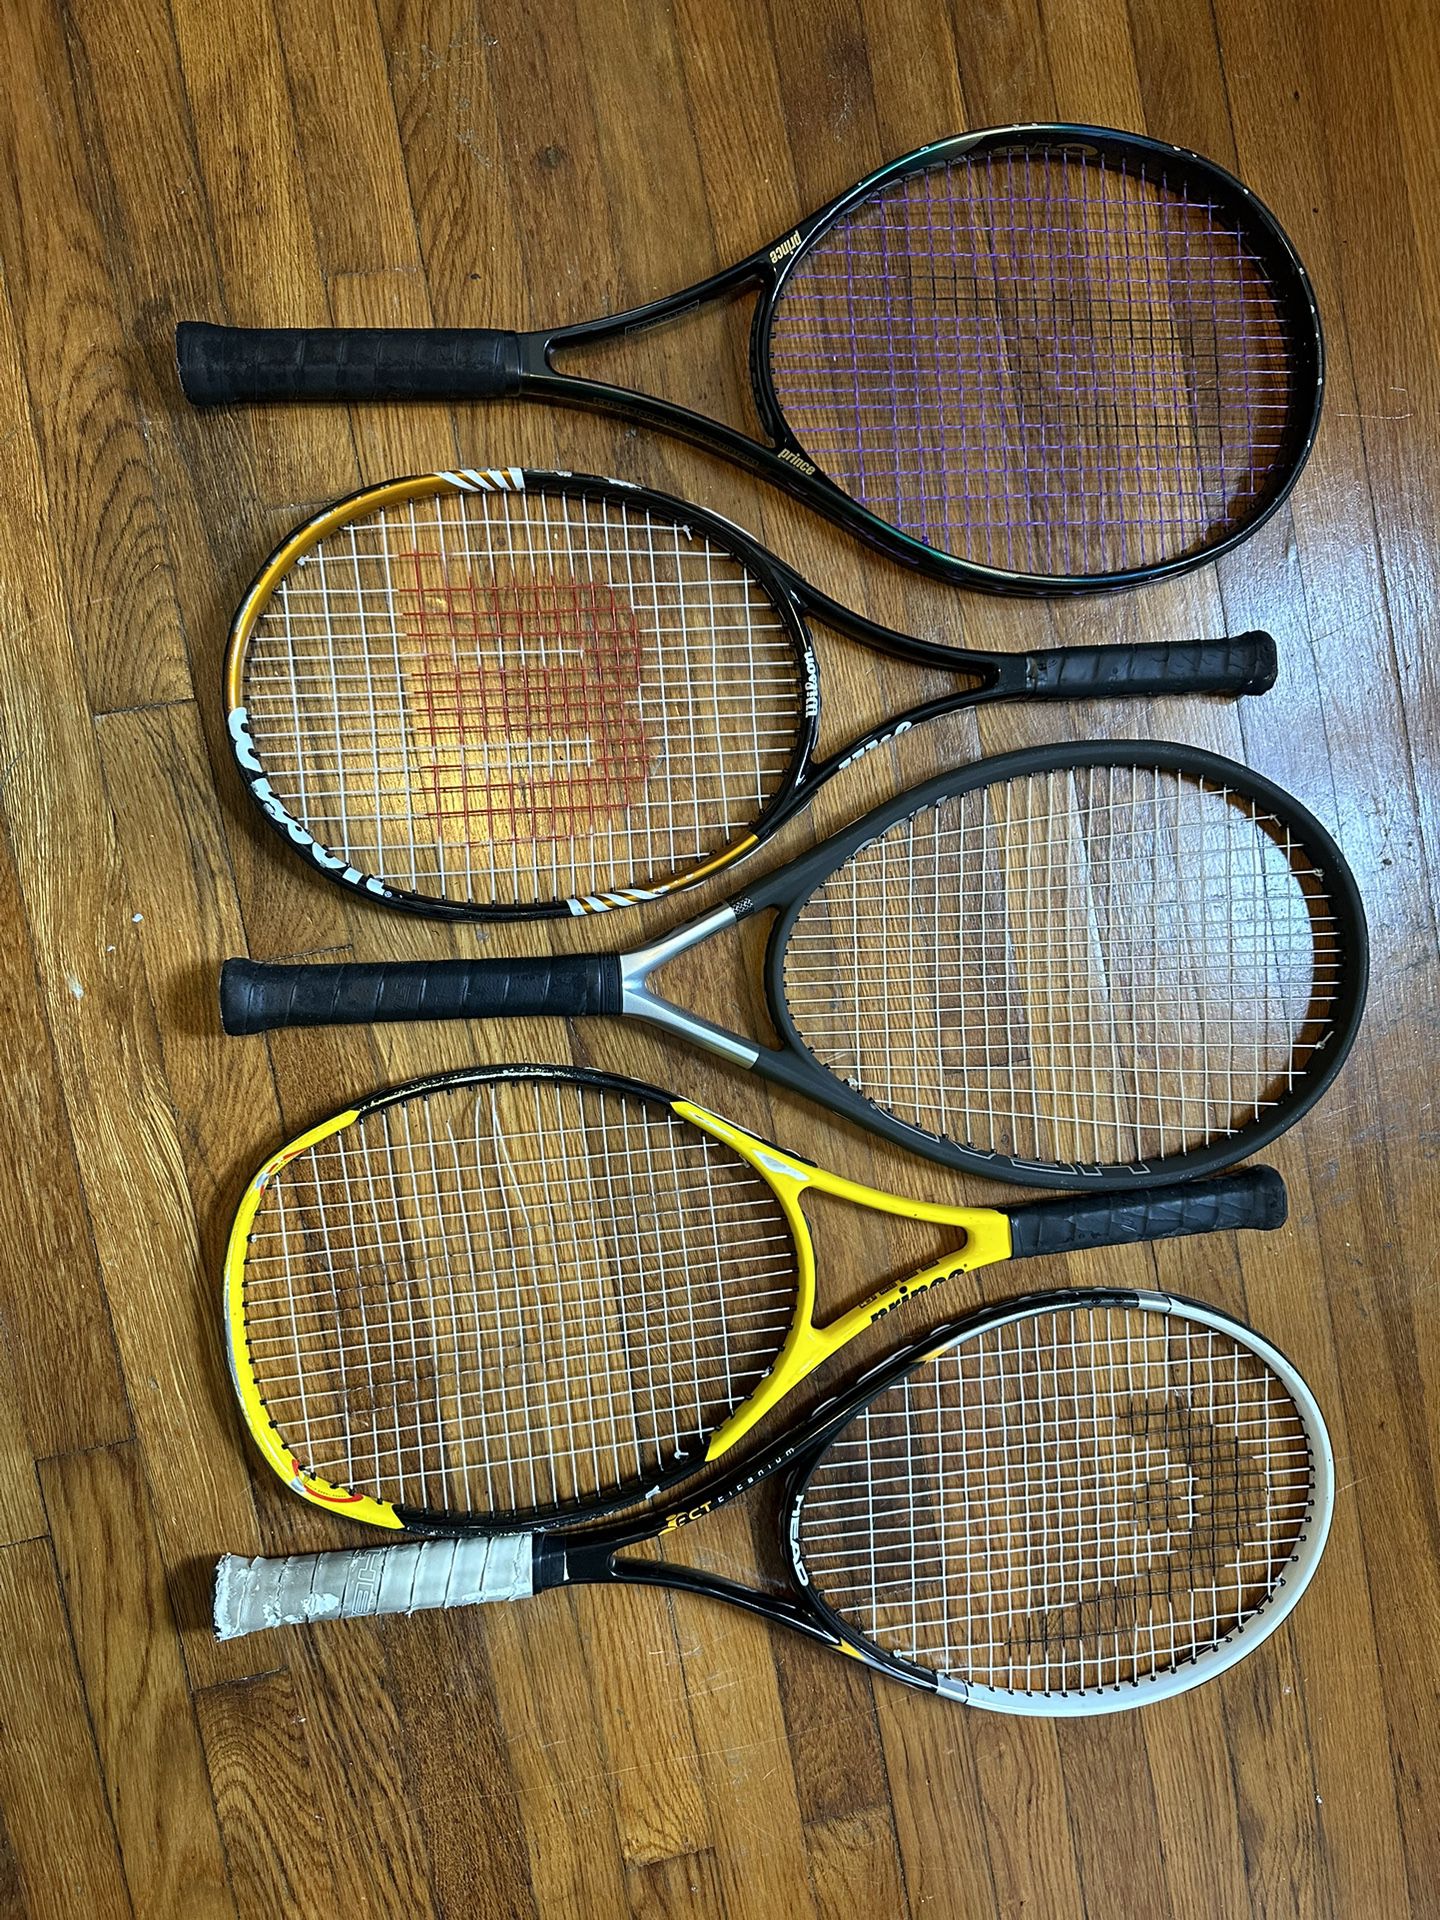 Tennis Rackets With Racket Bag